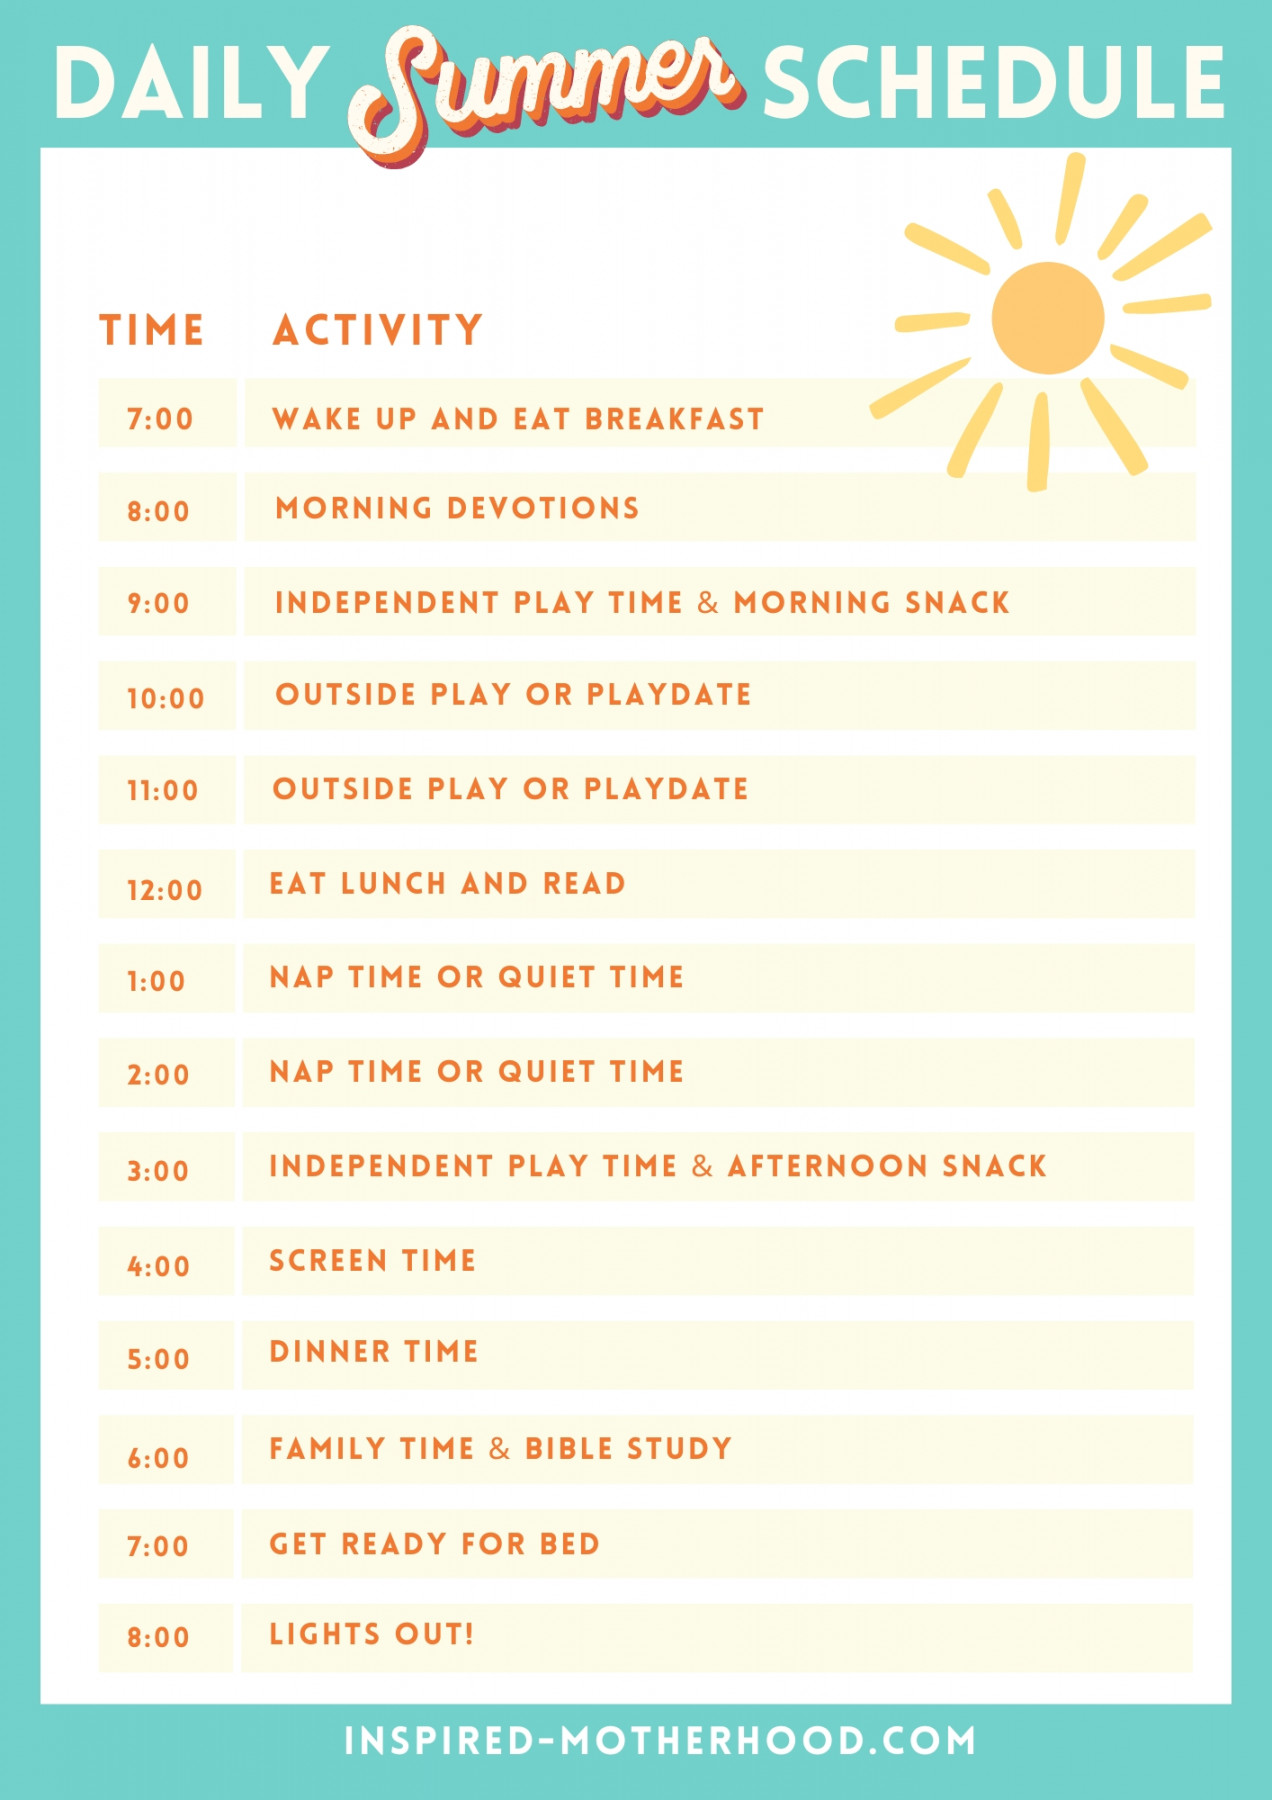 Summer Kids Schedule That Will Inspire You Plus Free Printable!